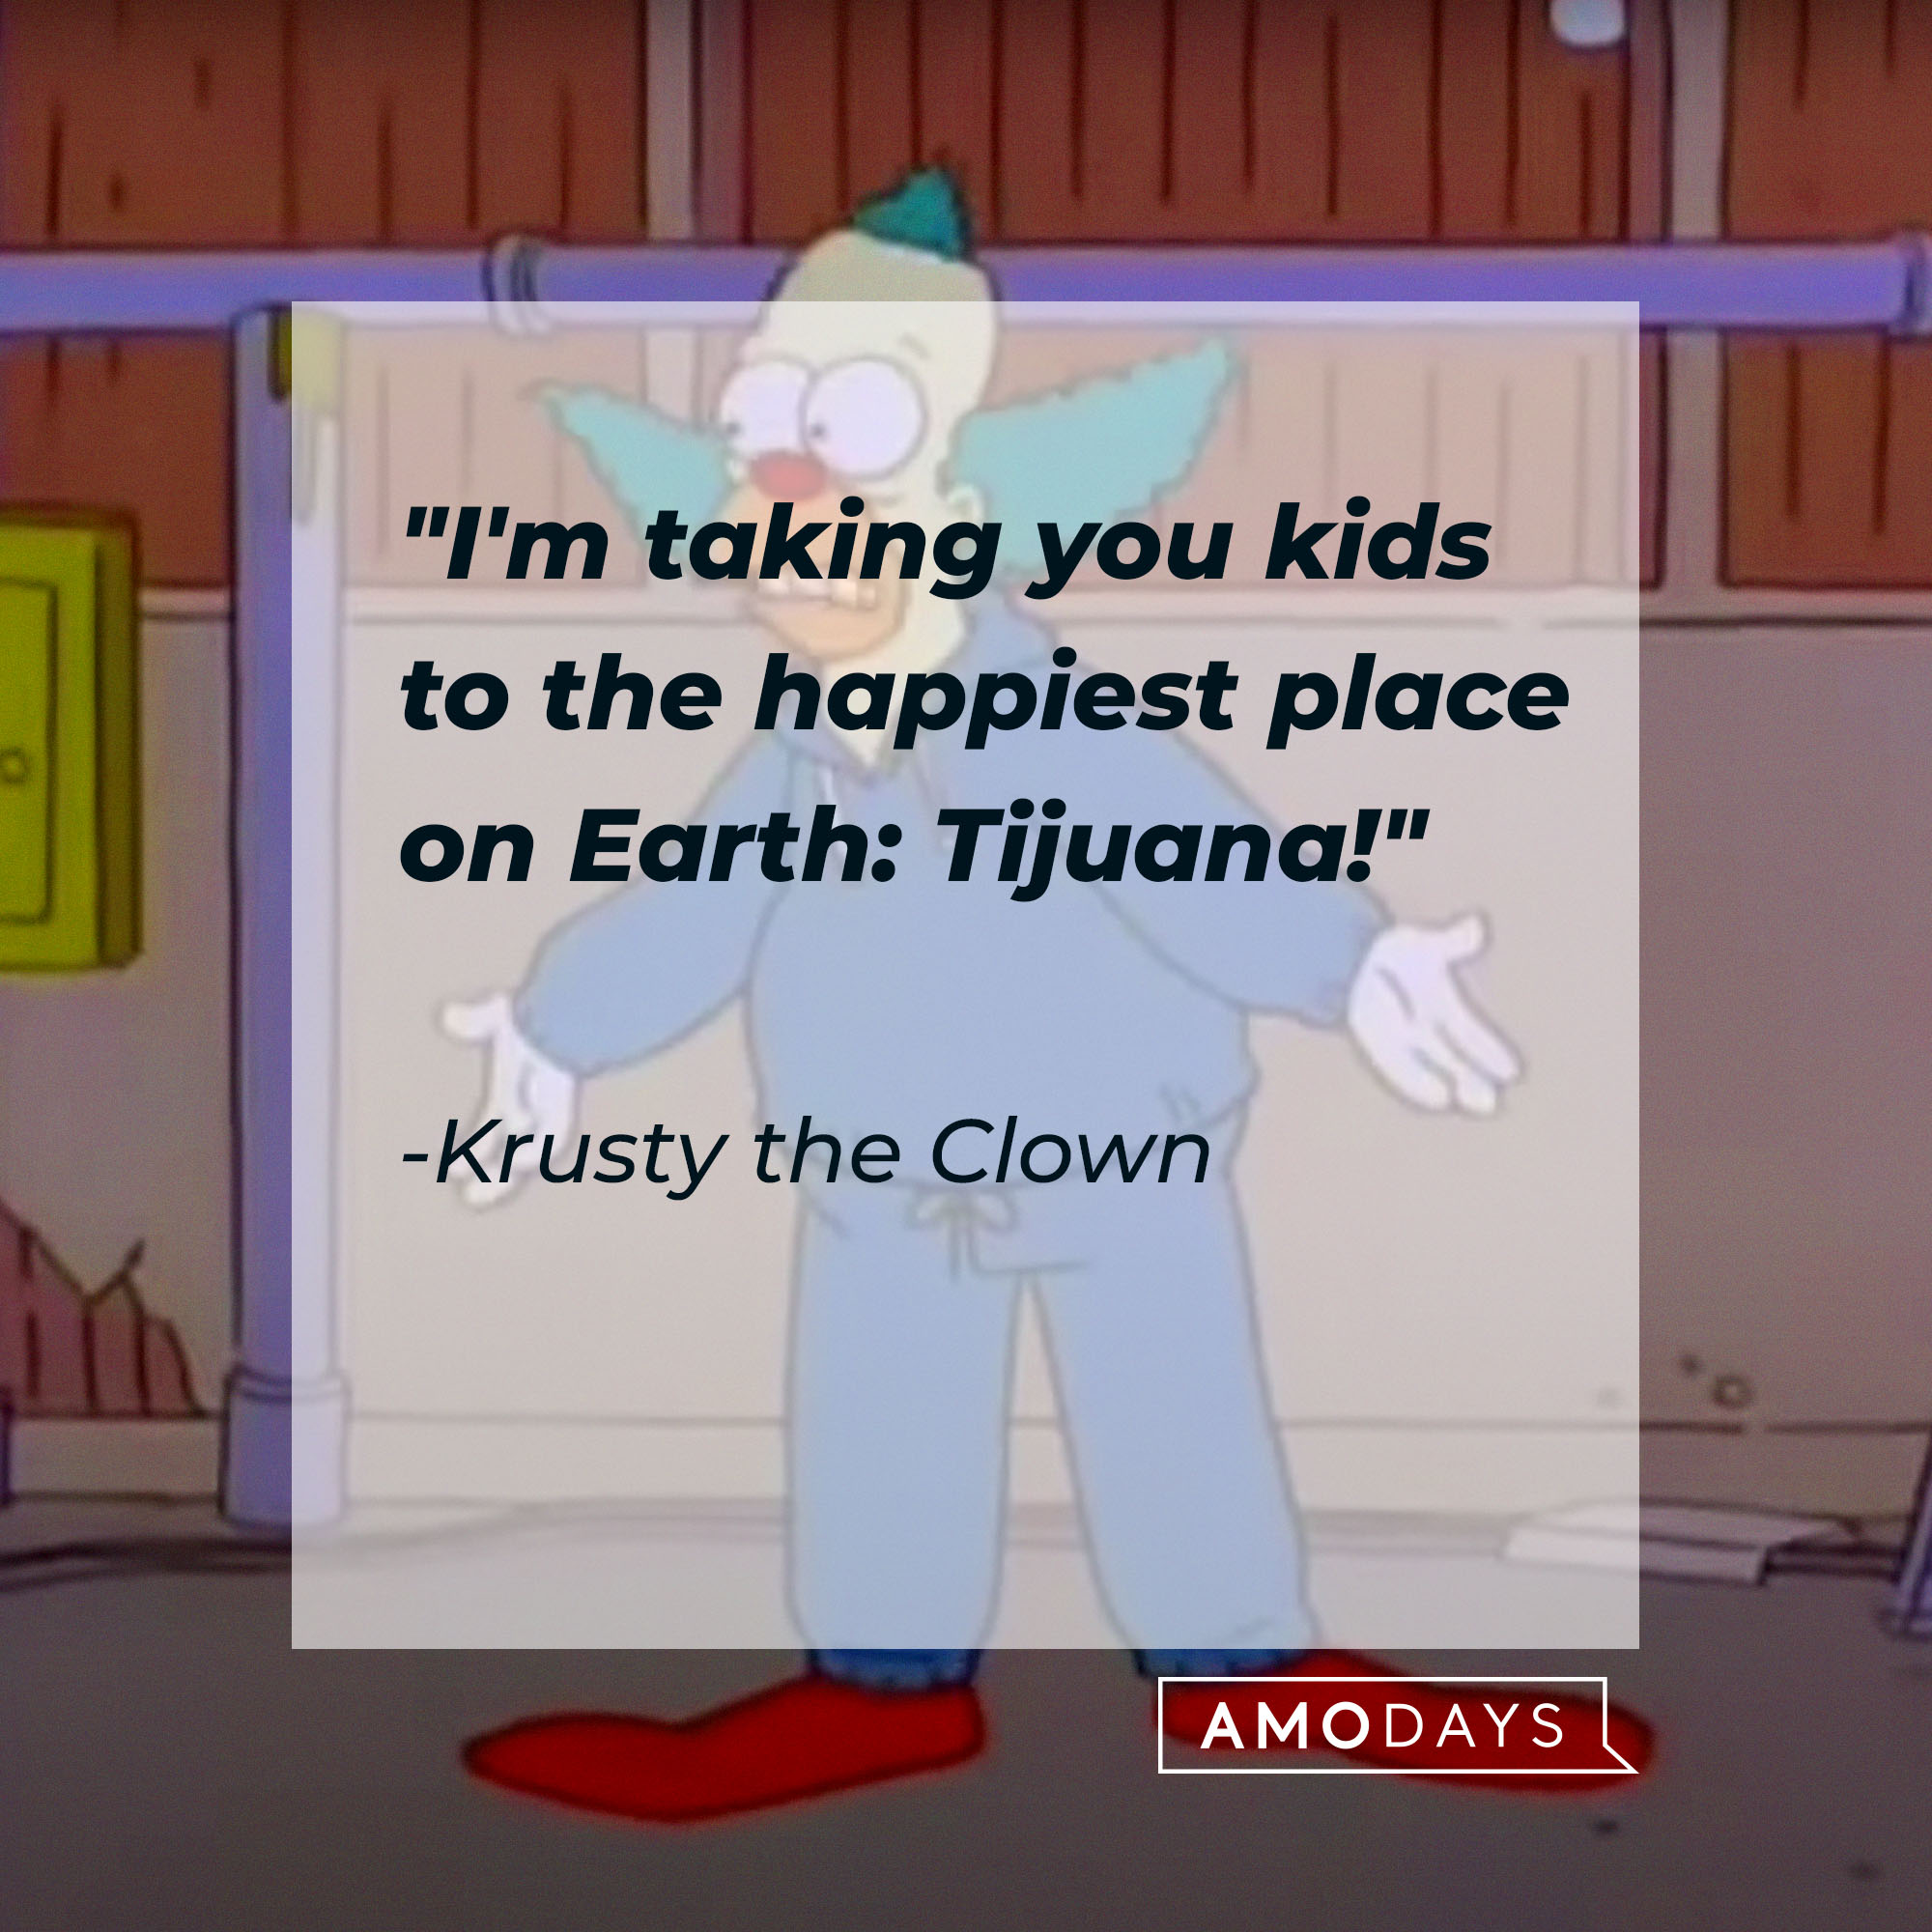 Krusty the Clown's quote: "I'm taking you kids to the happiest place on Earth: Tijuana!" | Source: Facebook.com/TheSimpsons